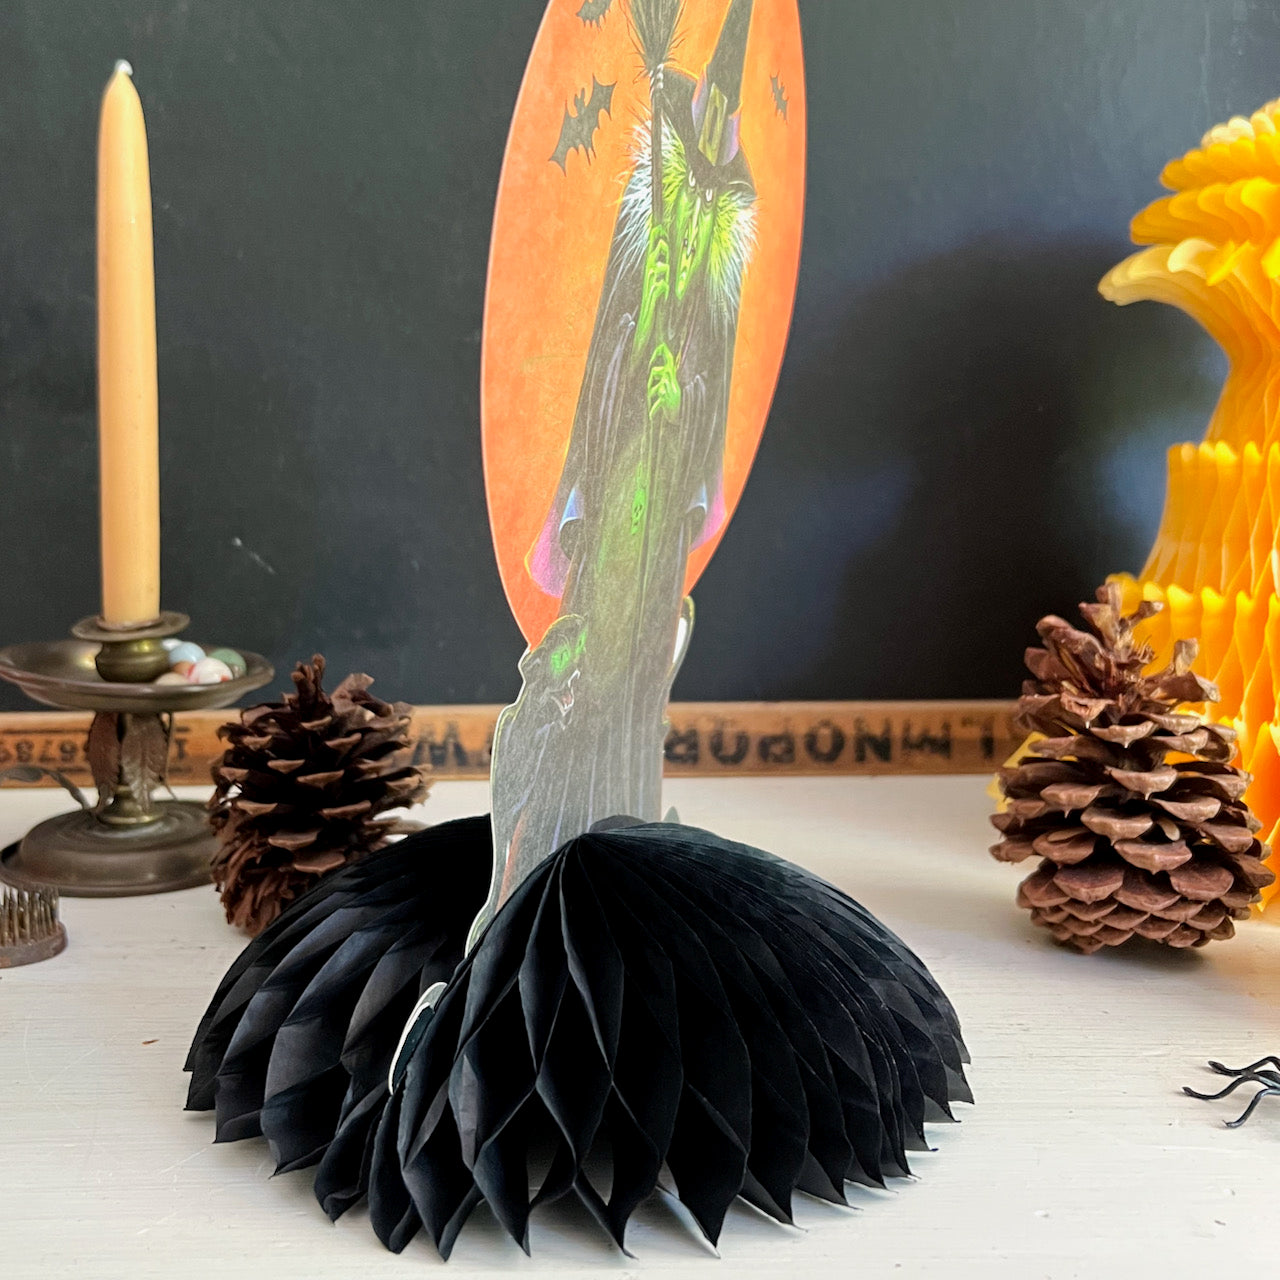 Vintage Halloween Witch Honeycomb Party Decoration (c.1984)